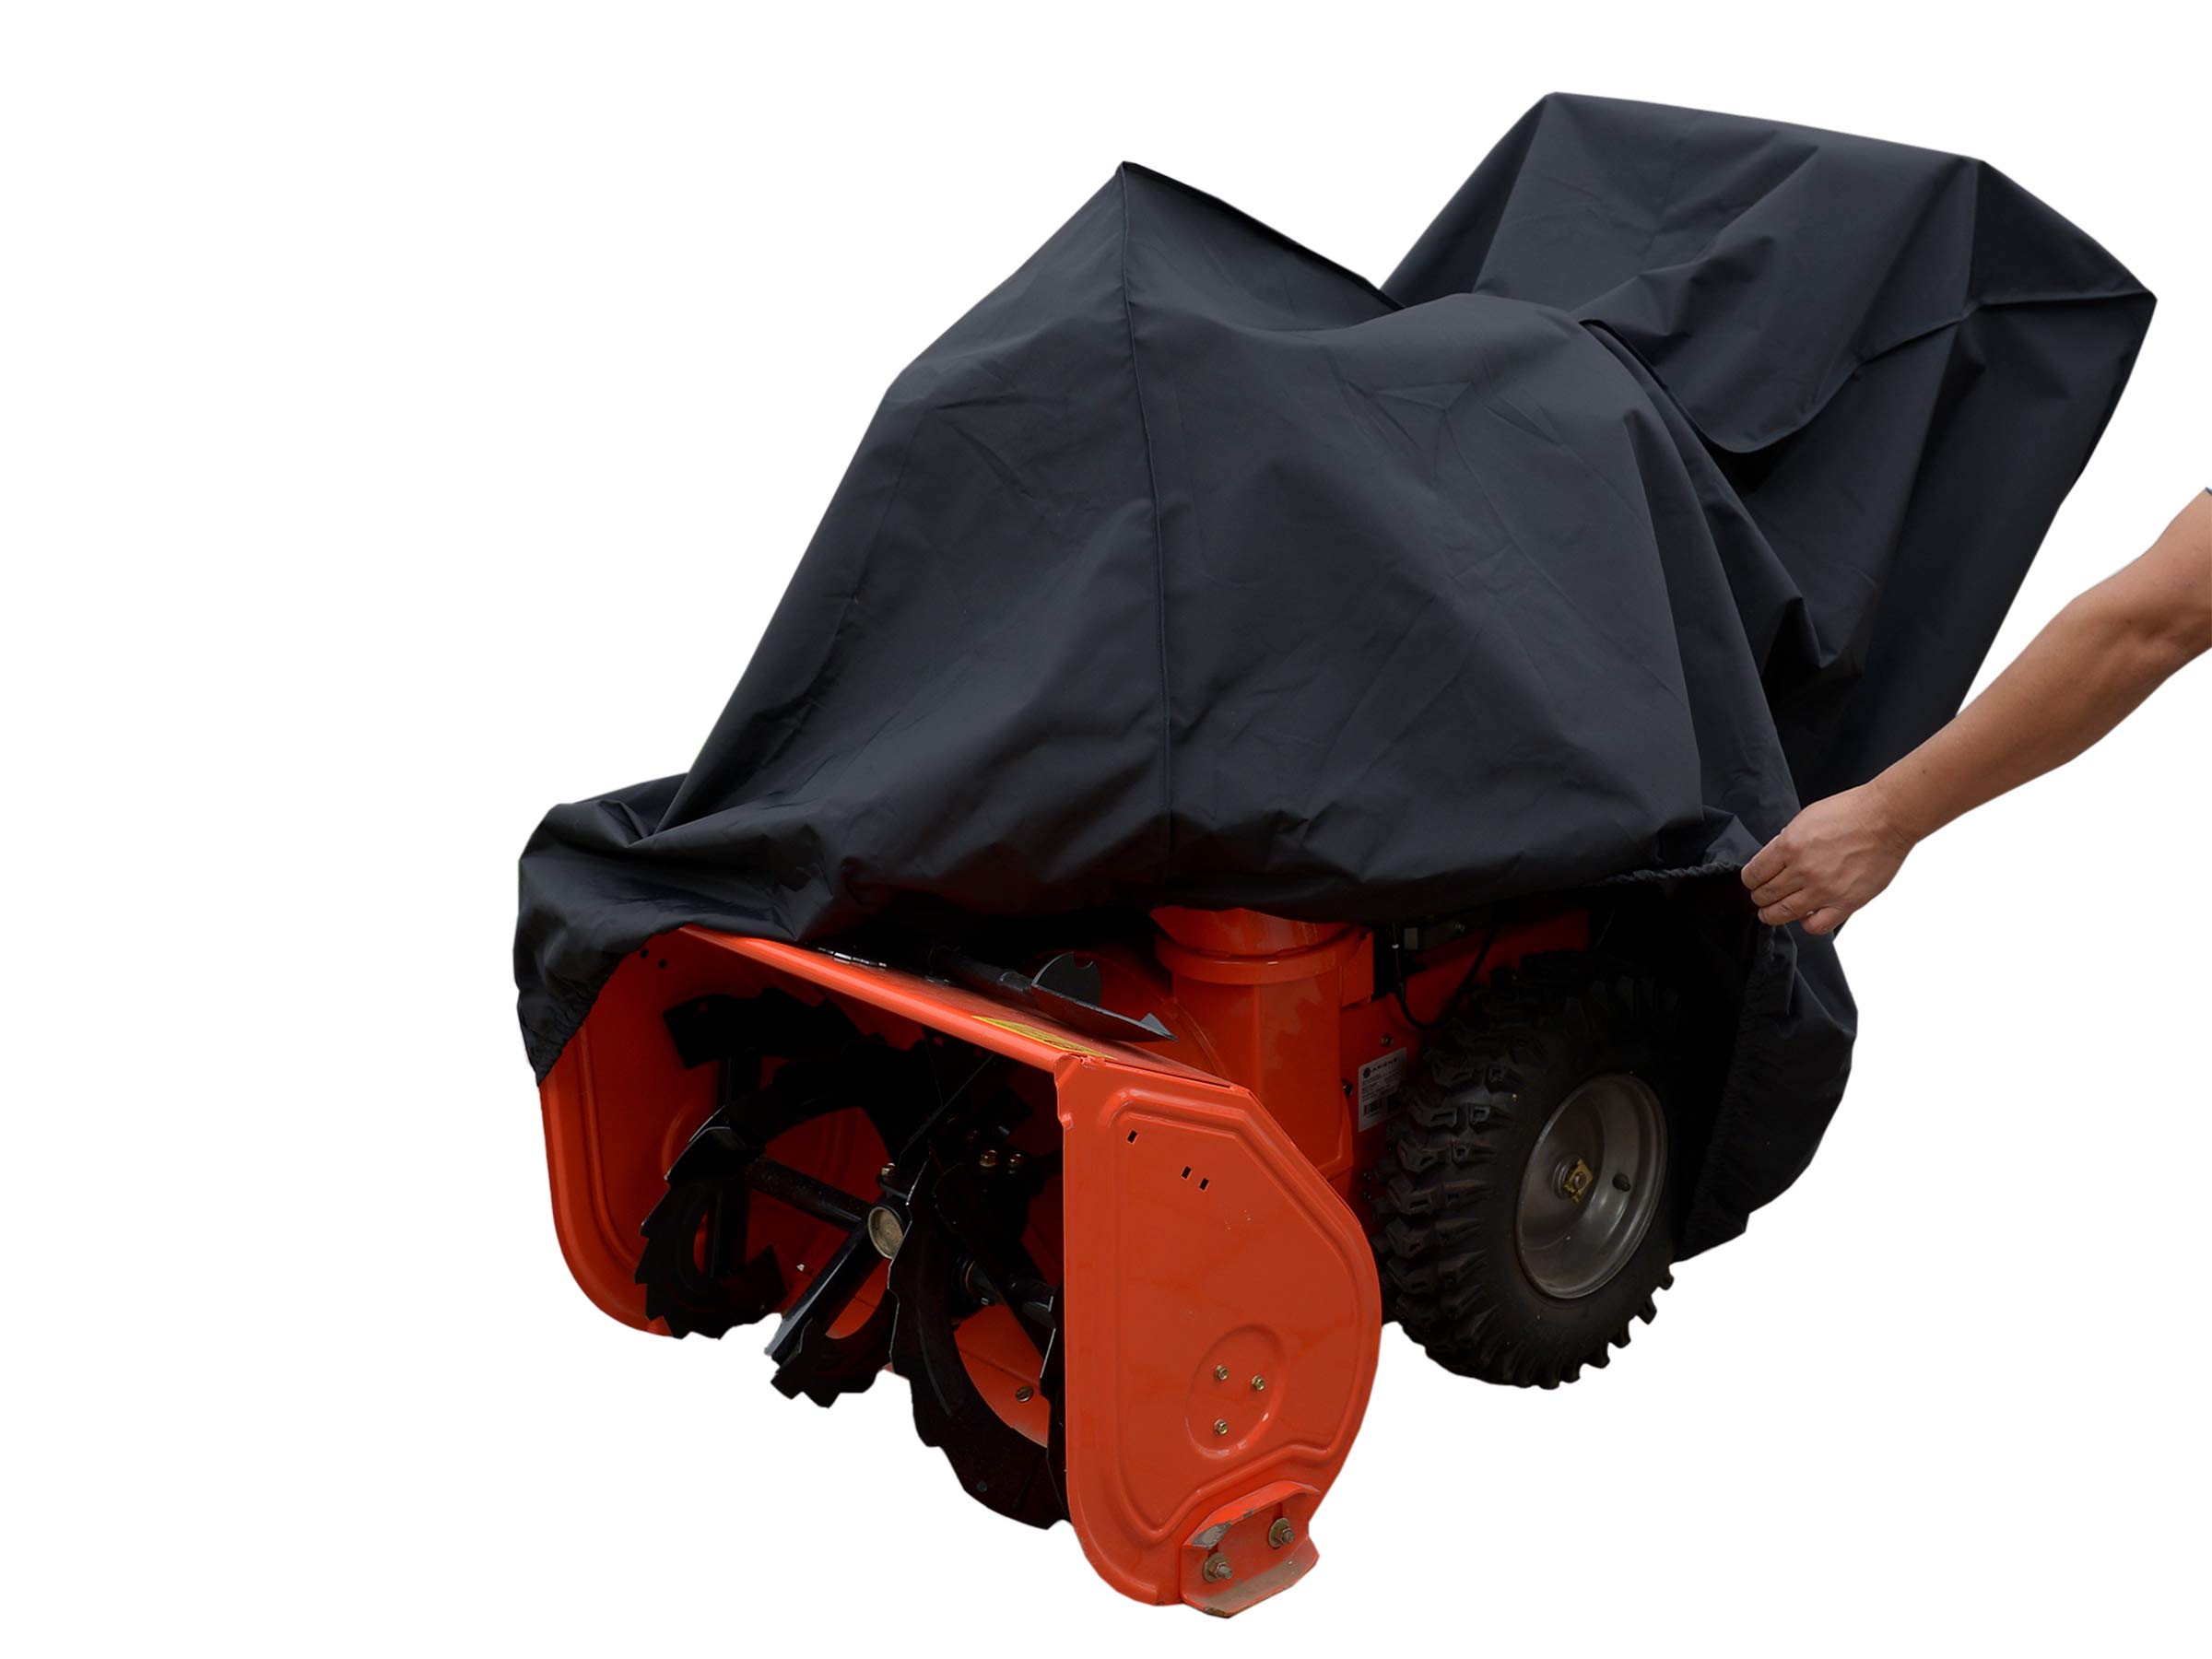 Comp Bind Technology Black Nylon Cover Compatible with Cub Cadet 3X30 Three-Stage Track Snow Blower Machine, Weather Resistant Cover Dimensions 31''W x 57''D x 42.7''H by Comp Bind Technology